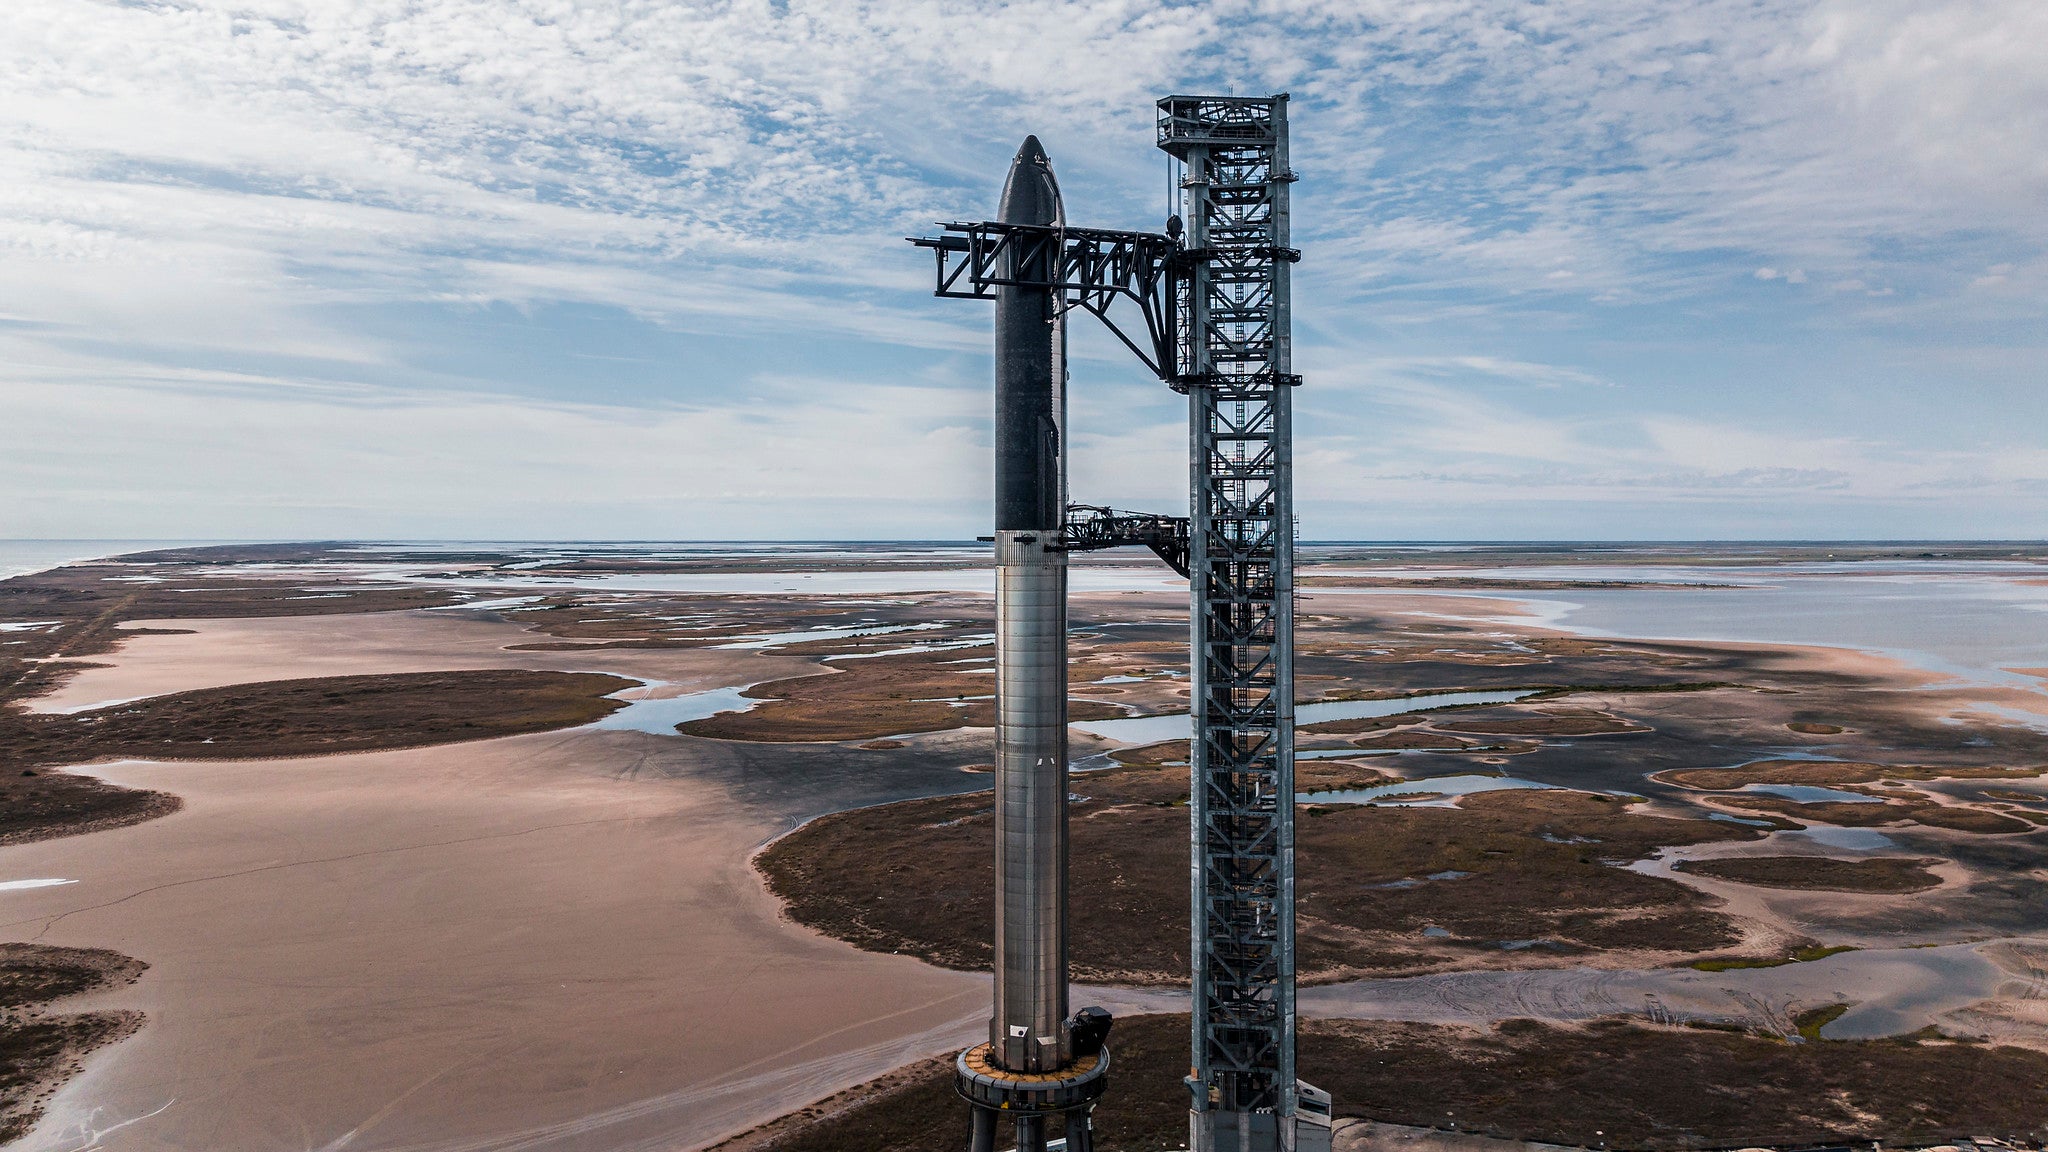 FAA concludes Starbase Environmental Assessment, SpaceX is required to take over 75 mitigation actions to reduce impacts before receiving Starship launch license